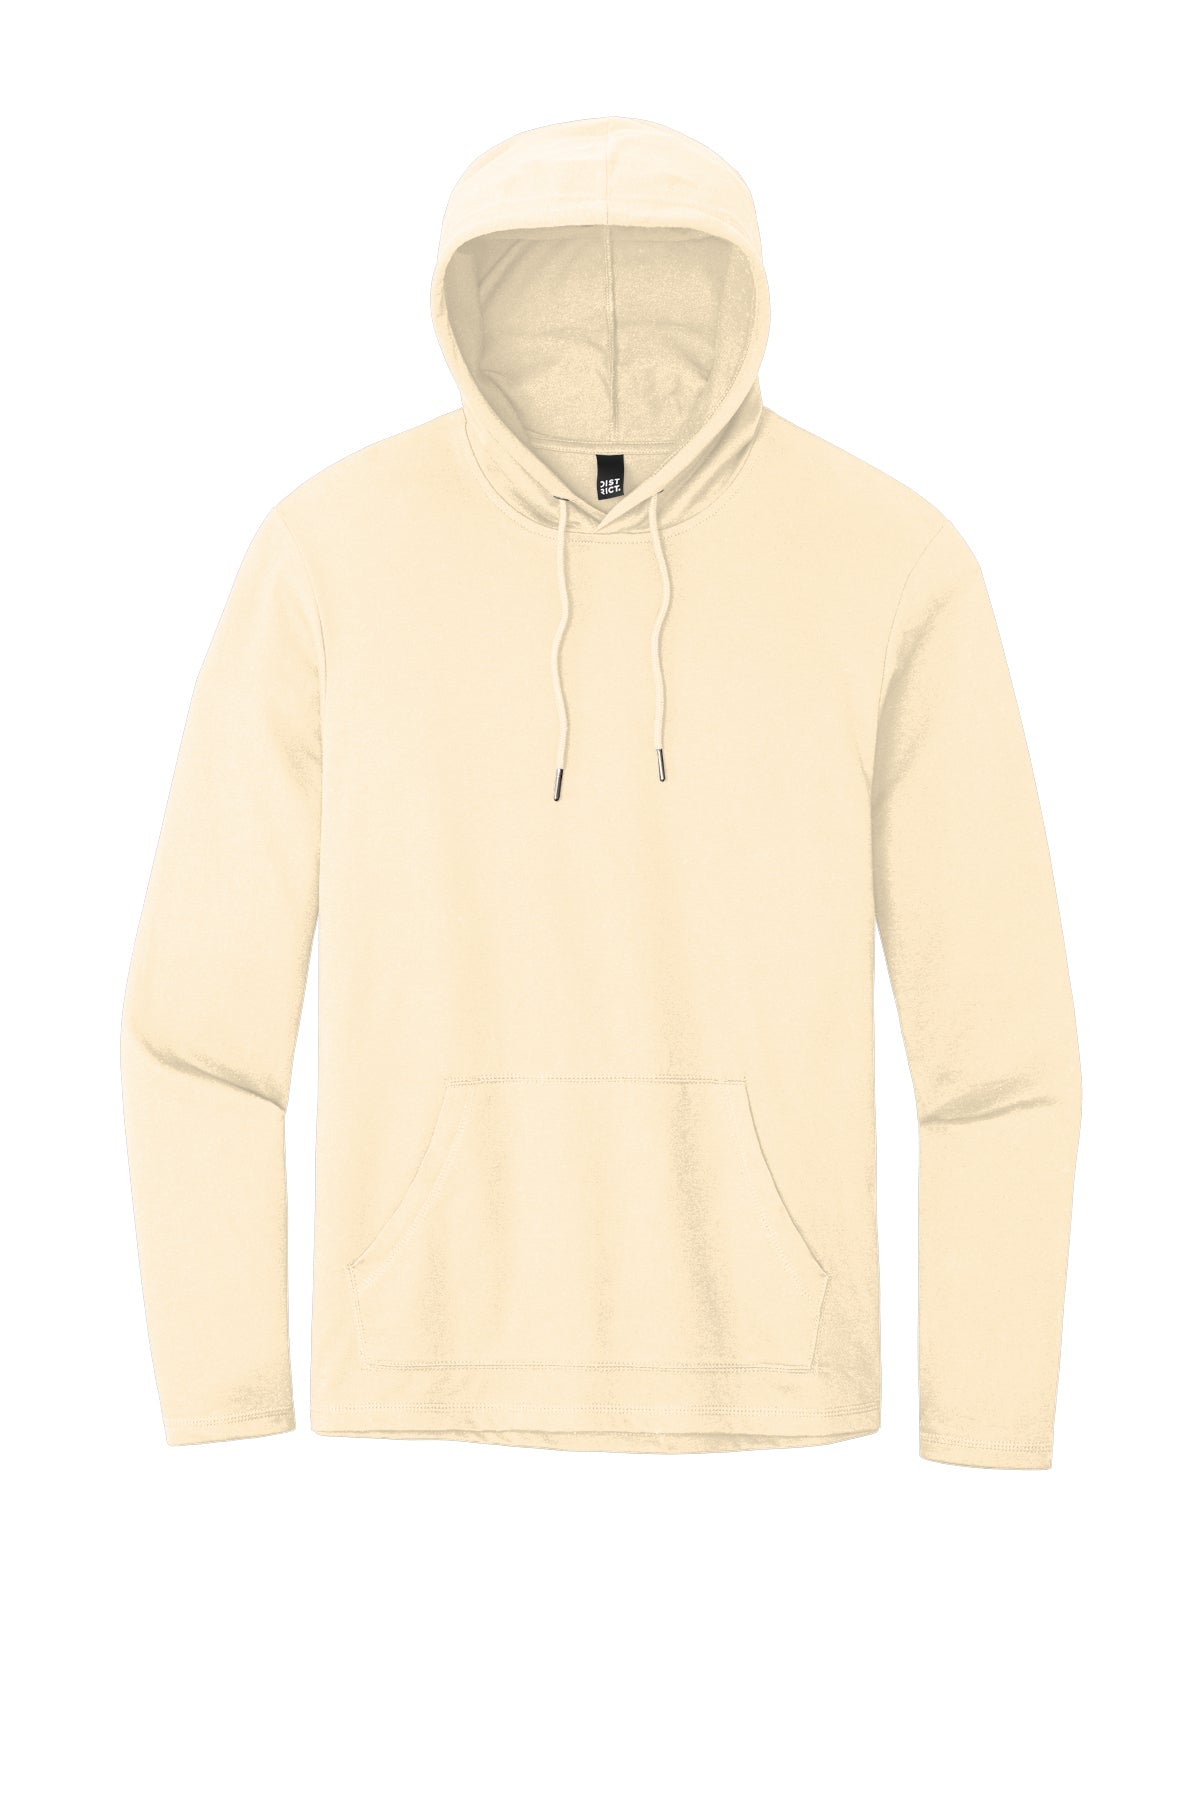 LIGHTWEIGHT - District ® Featherweight French Terry ™ Hoodie - DT571